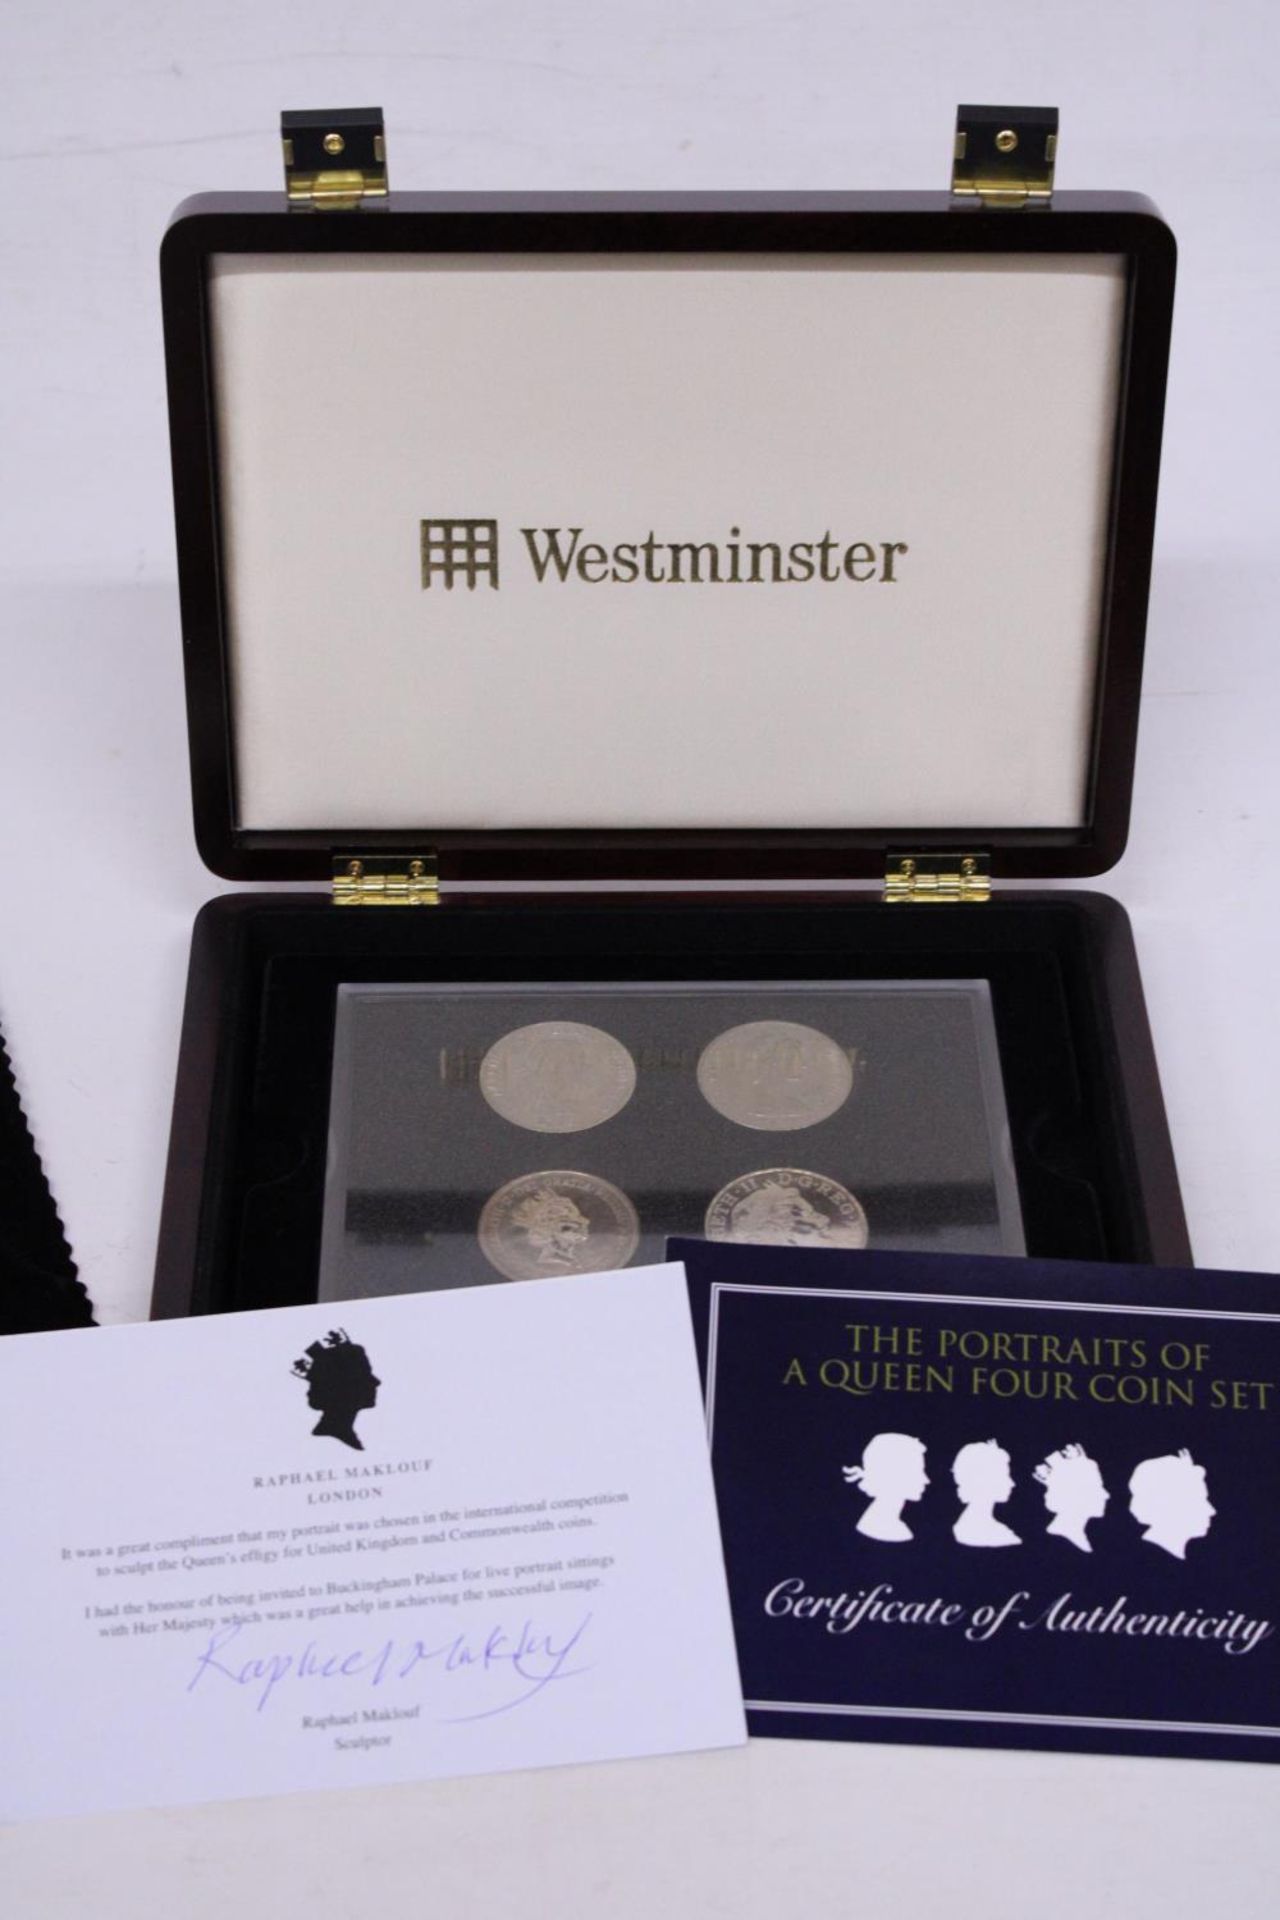 A WESTMINSTER BOXED FOUR COIN SET "THE PORTRAITS OF A QUEEN" WITH CERTIFICATE OF AUTHENTICITY